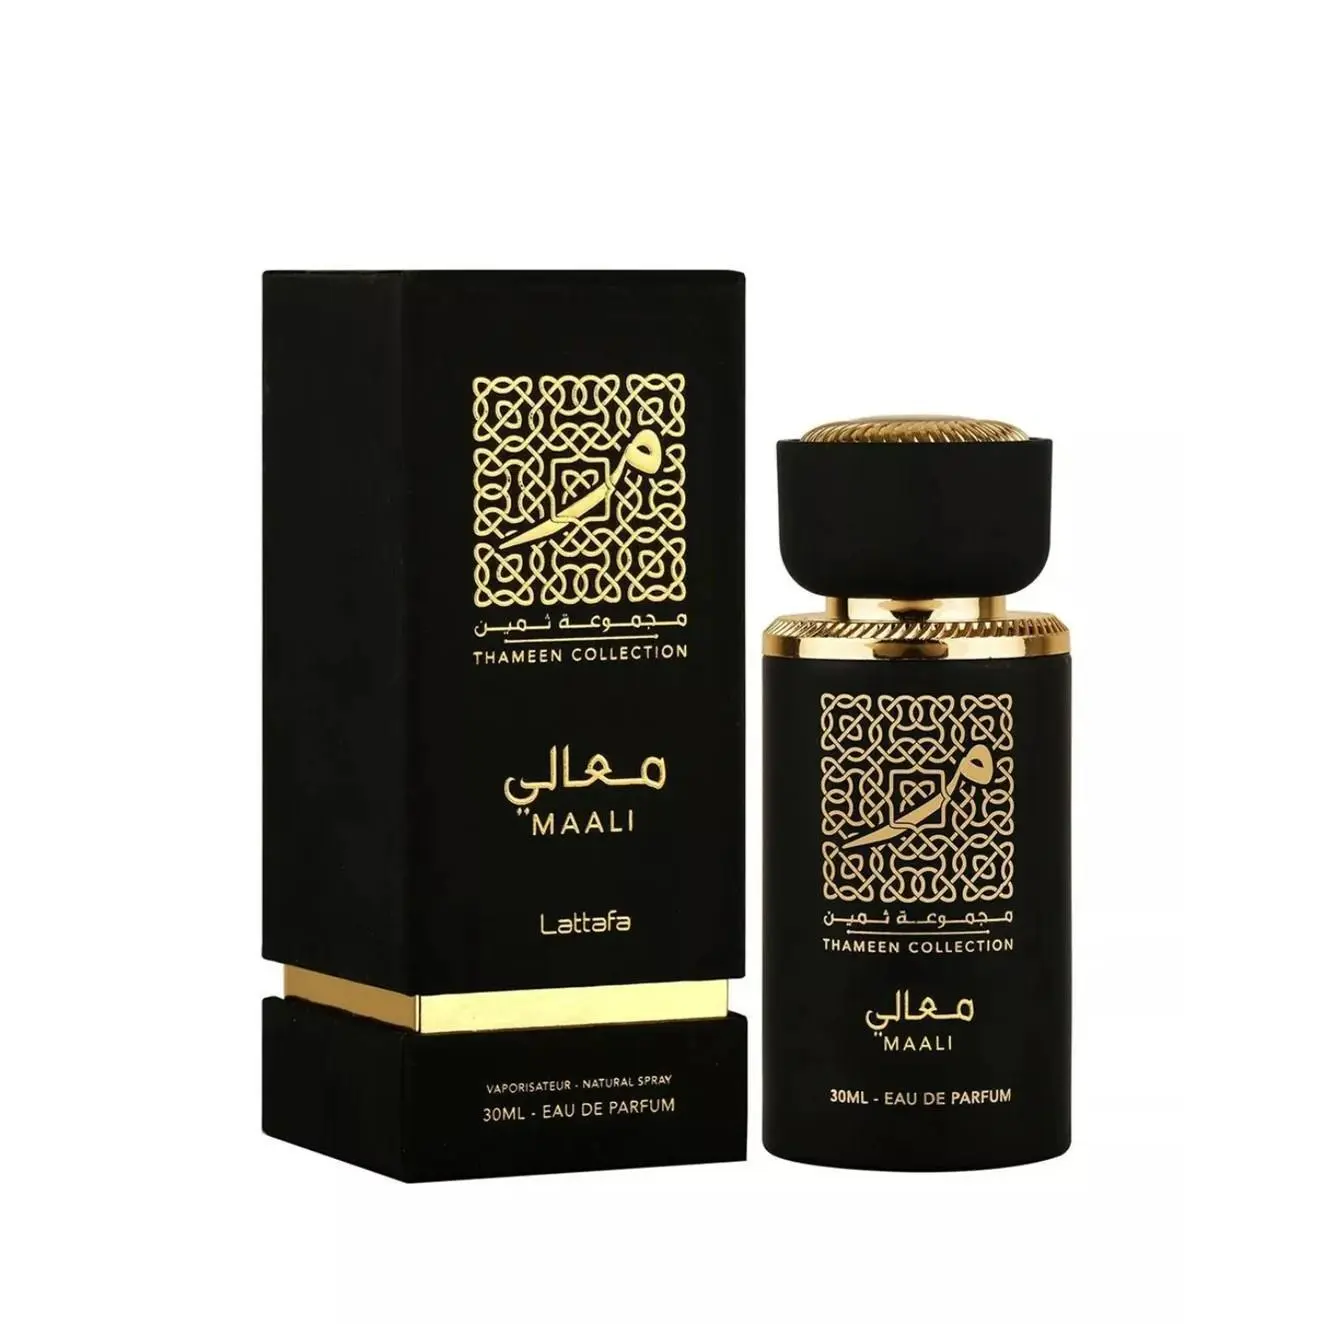 Maali Thameen Collection Perfume Eau De Parfum 30Ml By Lattafa Discover The Captivating Allure Of Shamoukh (Thameen Collection) Perfume By Lattafa. This Oriental And Woody Fragrance Takes You On A Sensory Journey With Its Floral, Balsamic, And Warm Notes. Indulge In The Sublime Essence Of Shamoukh And Elevate Your Fragrance Collection. Experience The Beauty Of This Captivating Perfume Today. Soghaat Gifts &Amp; Fragrances